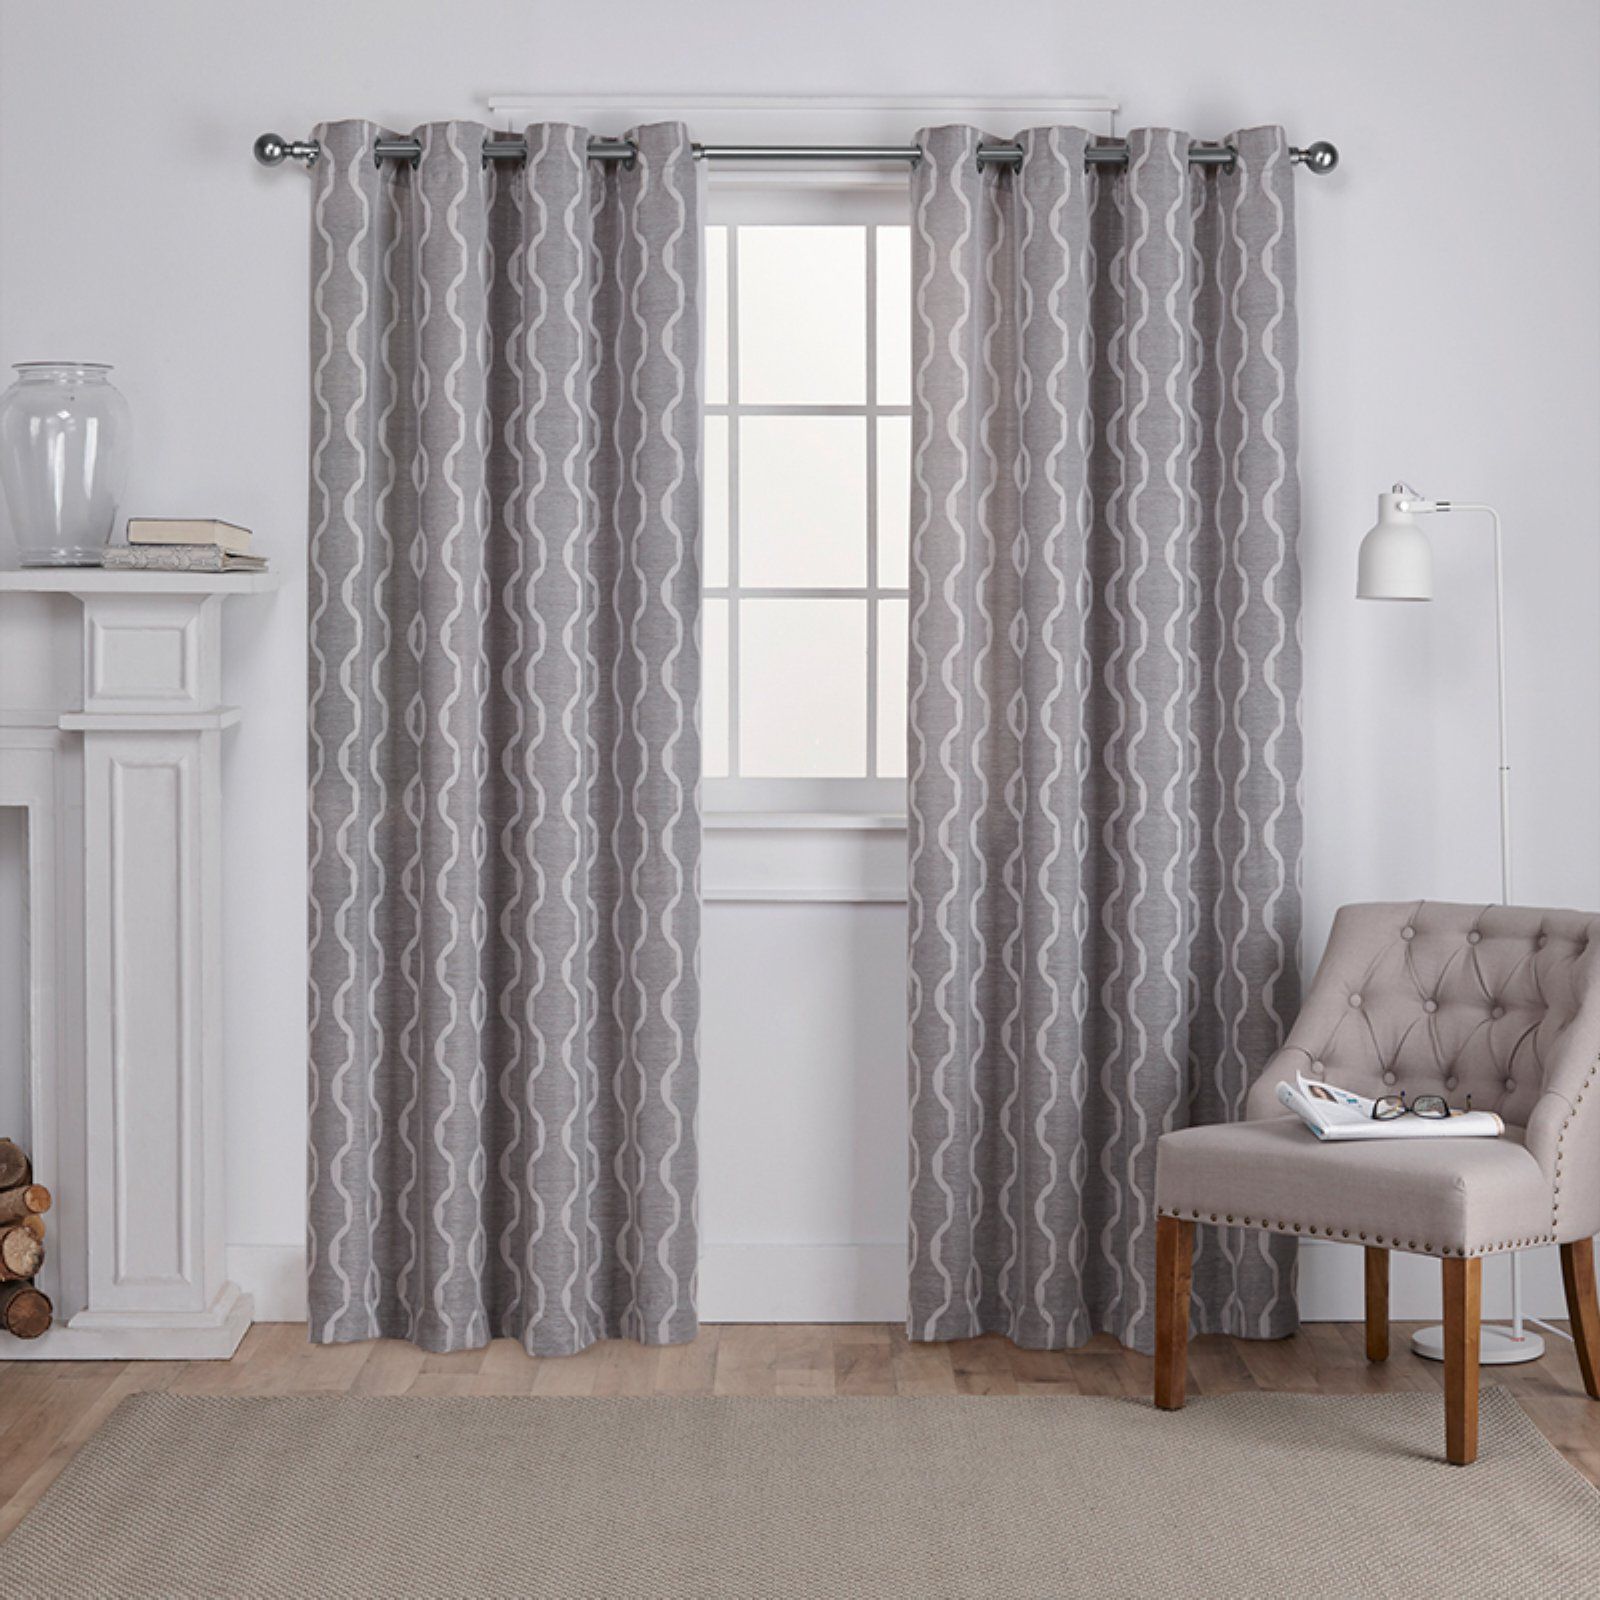 Kaiden Geometric Room Darkening Window Curtains Intended For Trendy Exclusive Home Baroque Window Curtain Panel Pair (View 11 of 20)